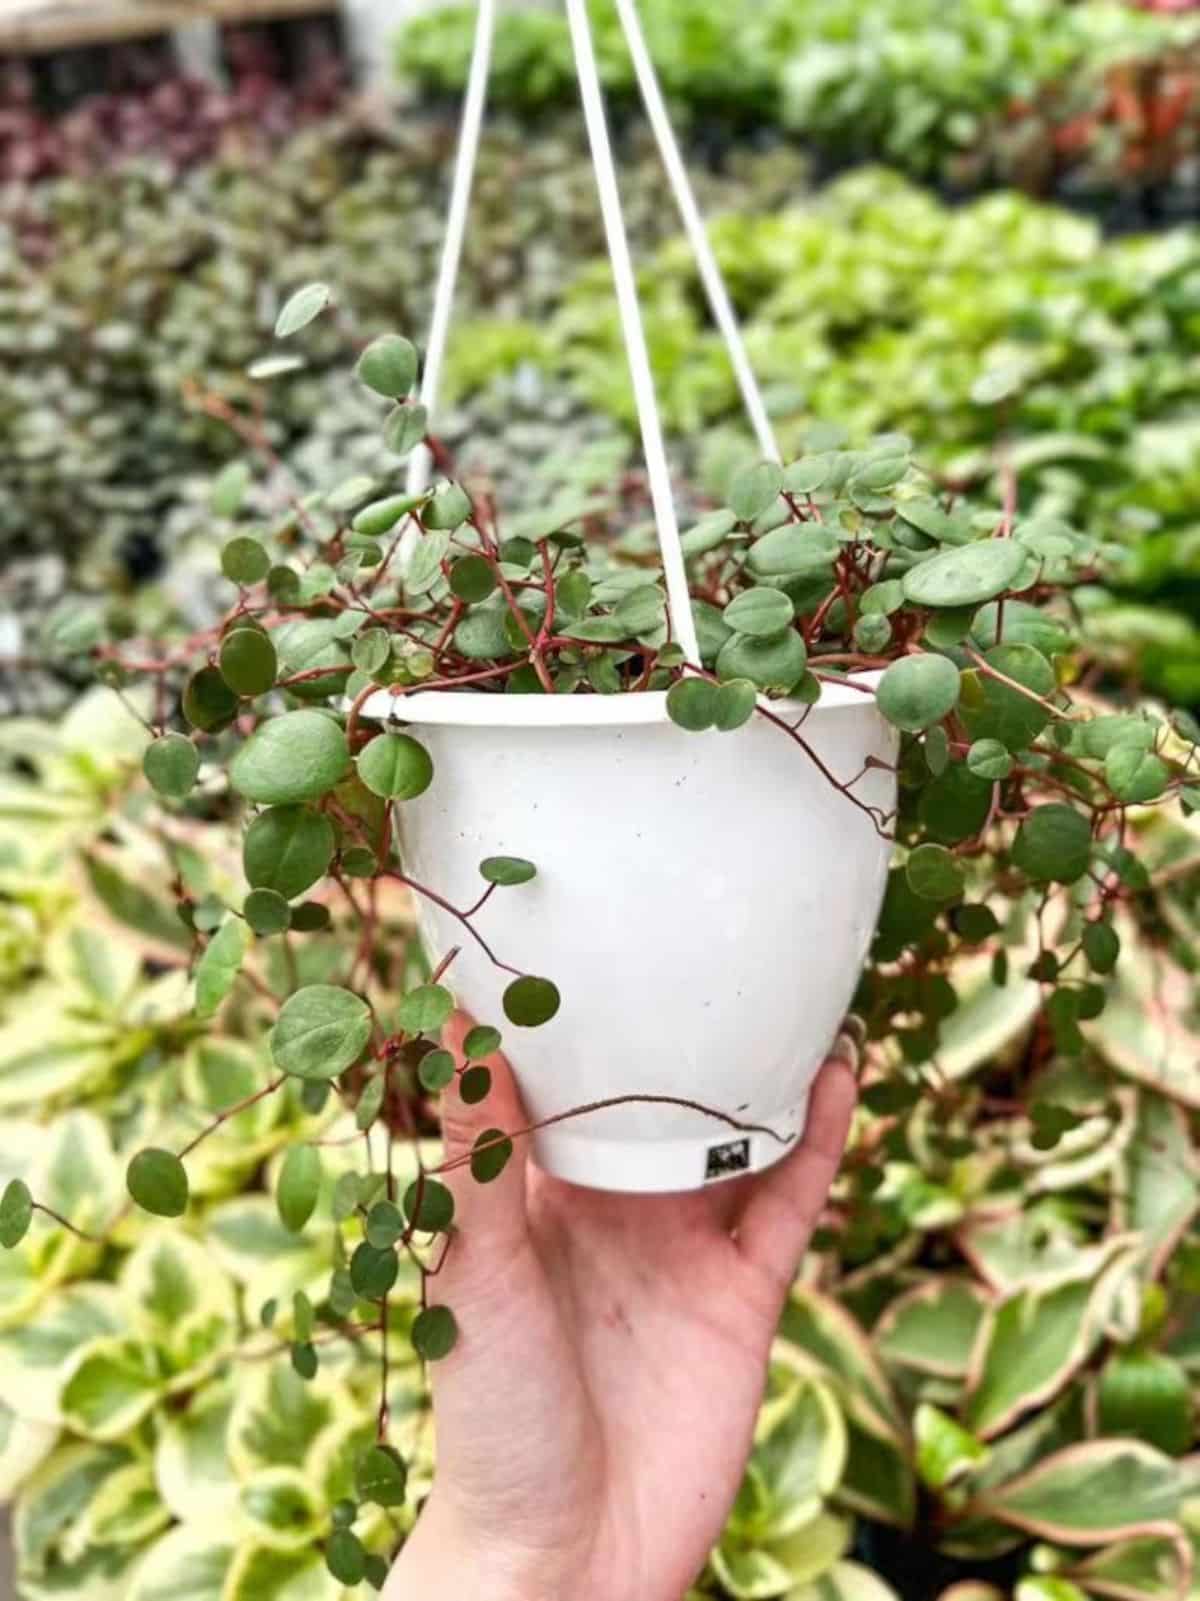 A Peperomia Ruby cascade in a white hanging pot held by hand.